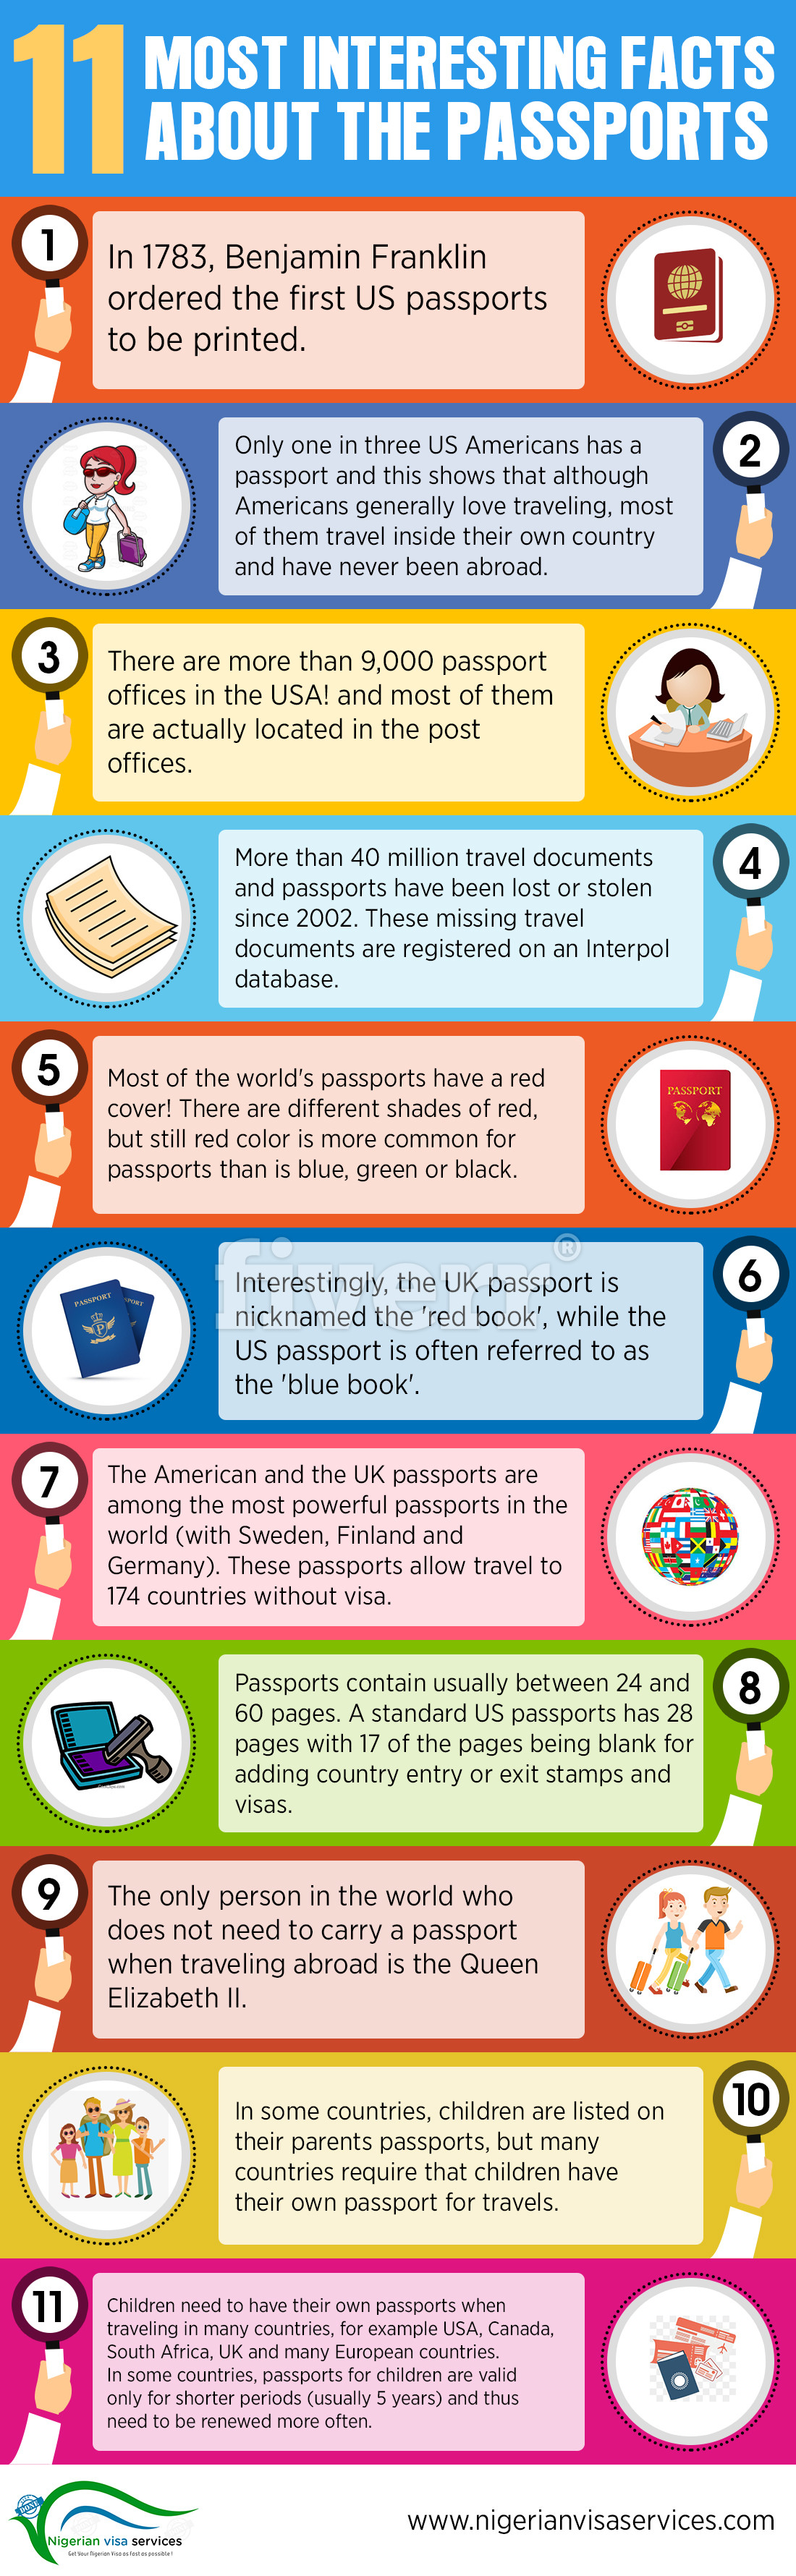 11 Most Interesting Facts About The Passports